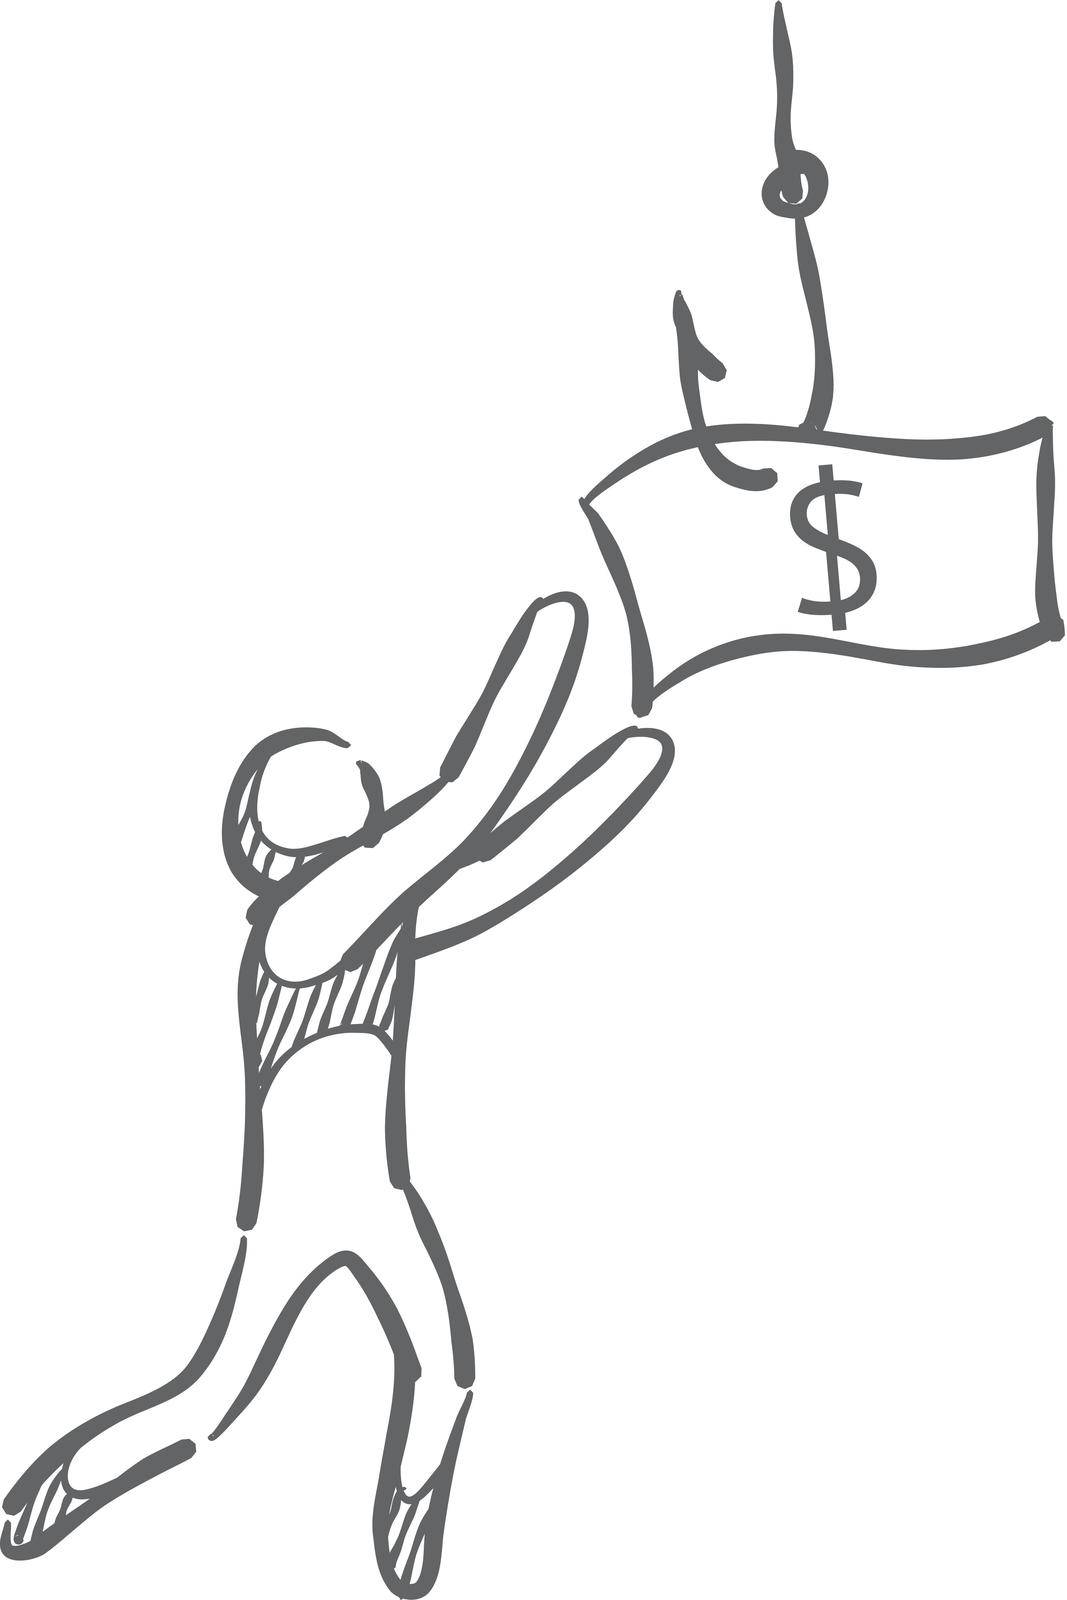 Man chasing dollar bait icon in sketch style. Vector illustration. by puruan